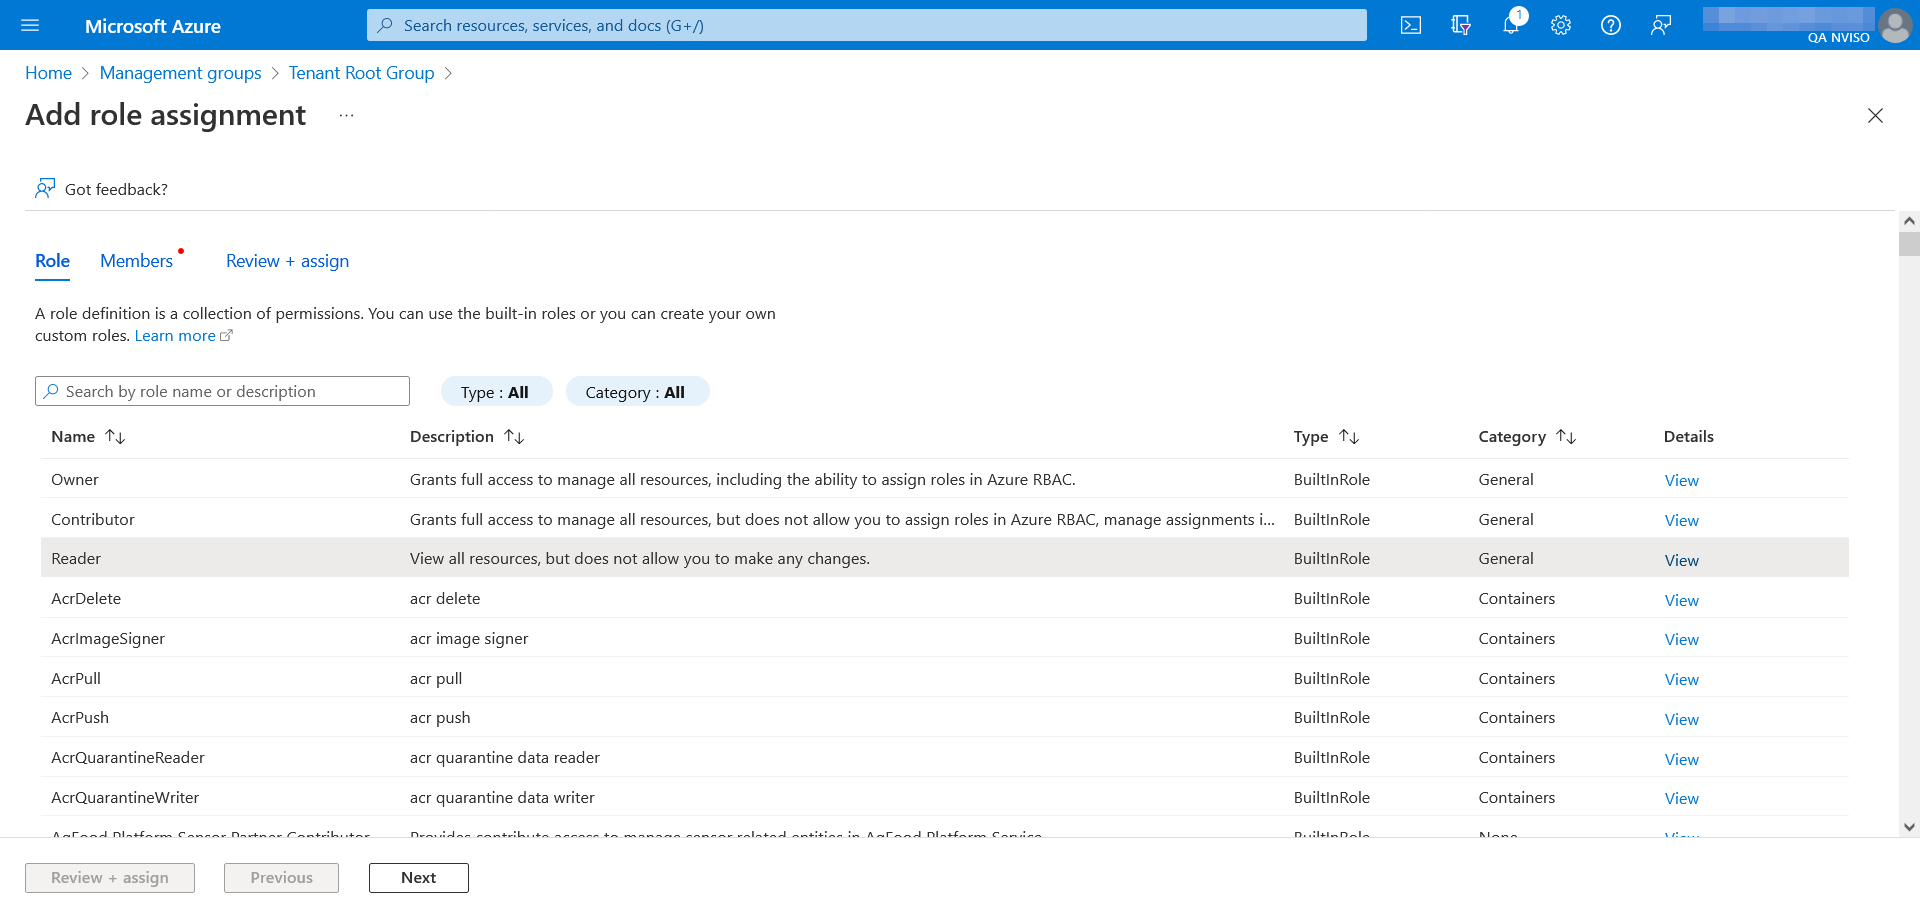 A role assignment&rsquo;s role selection in the Azure portal.